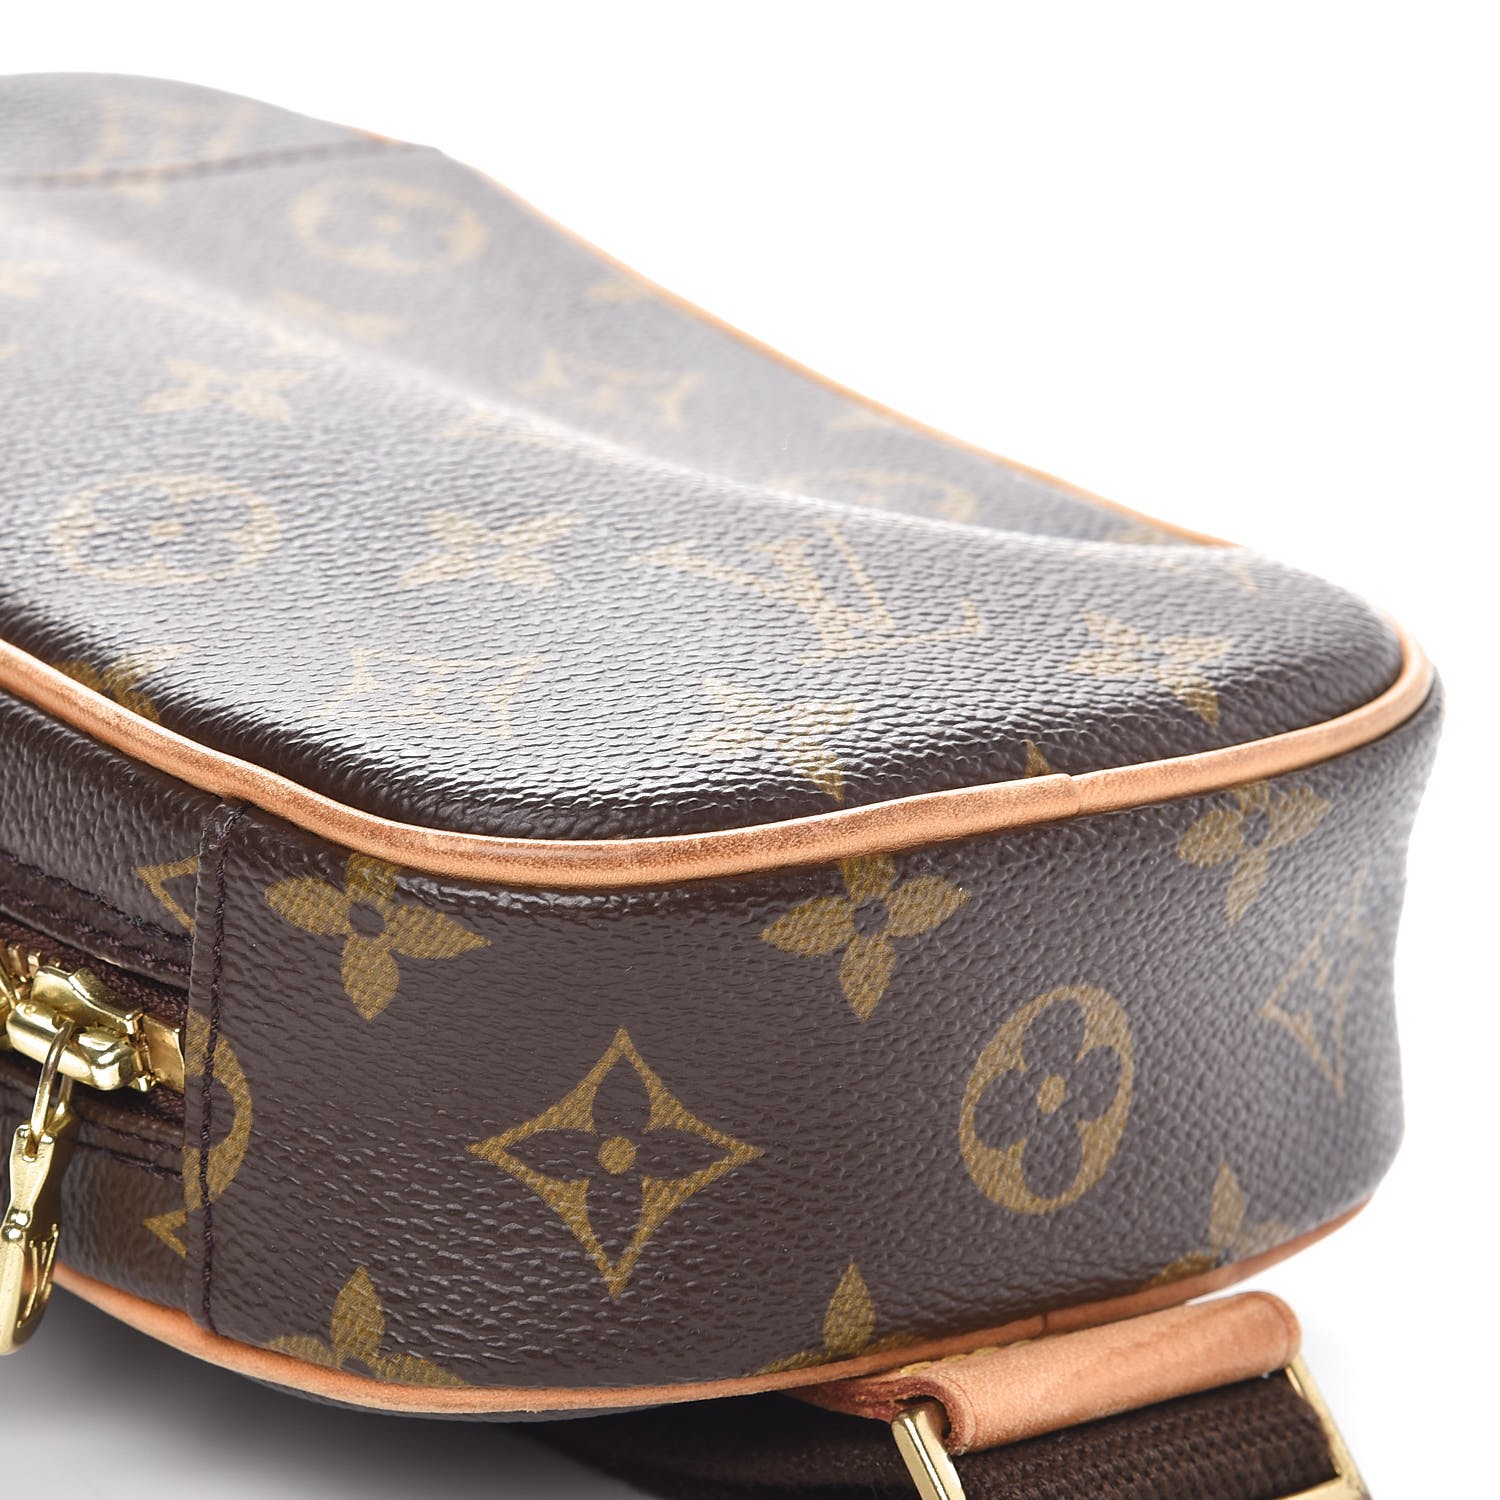 May I introduce you to my favorite bag, the 2003 LV Pochette Gange